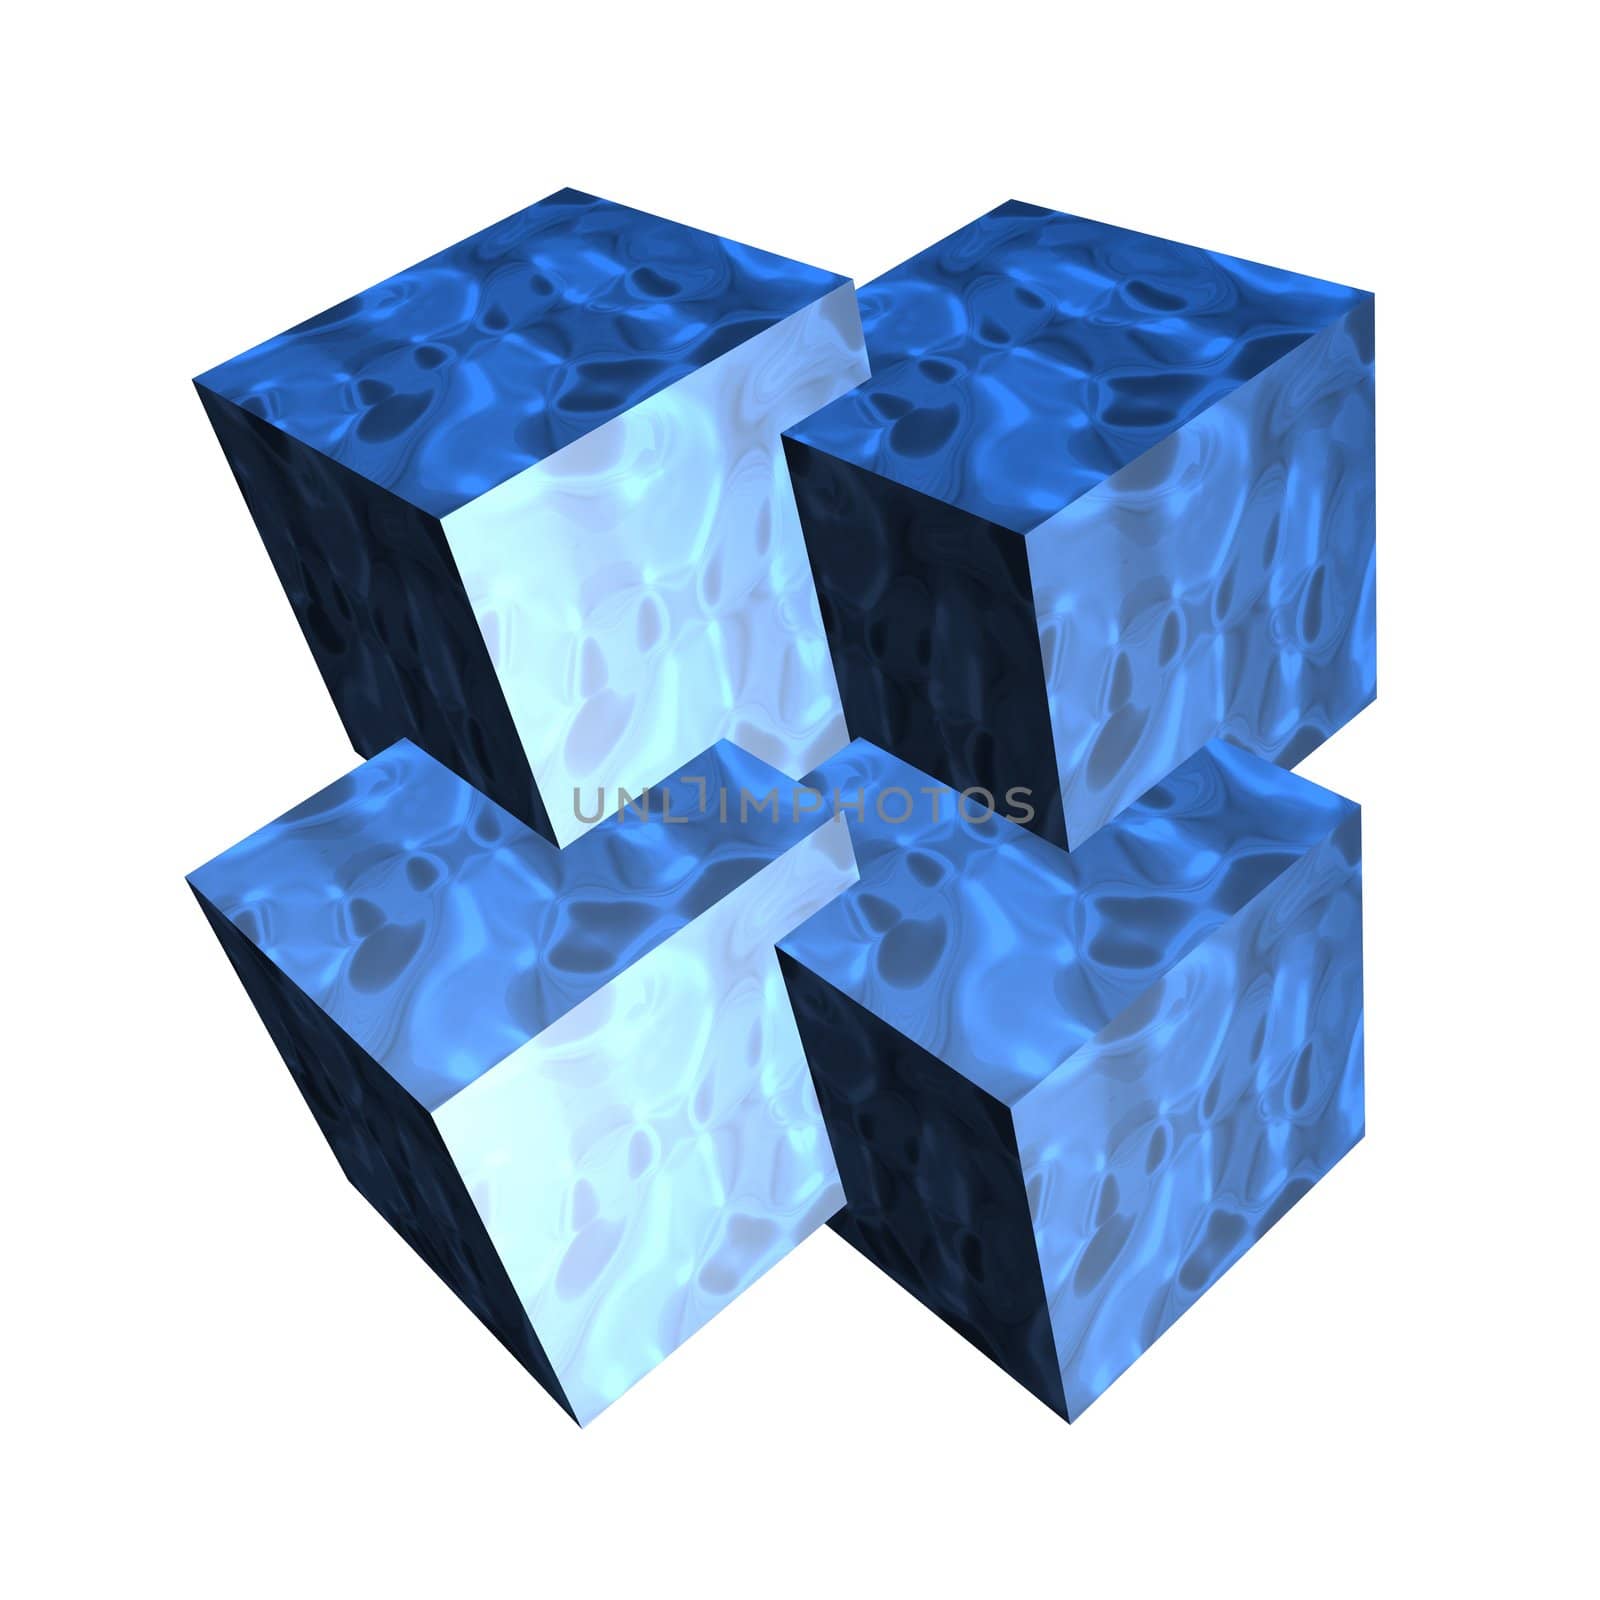 Cubes by Kitch